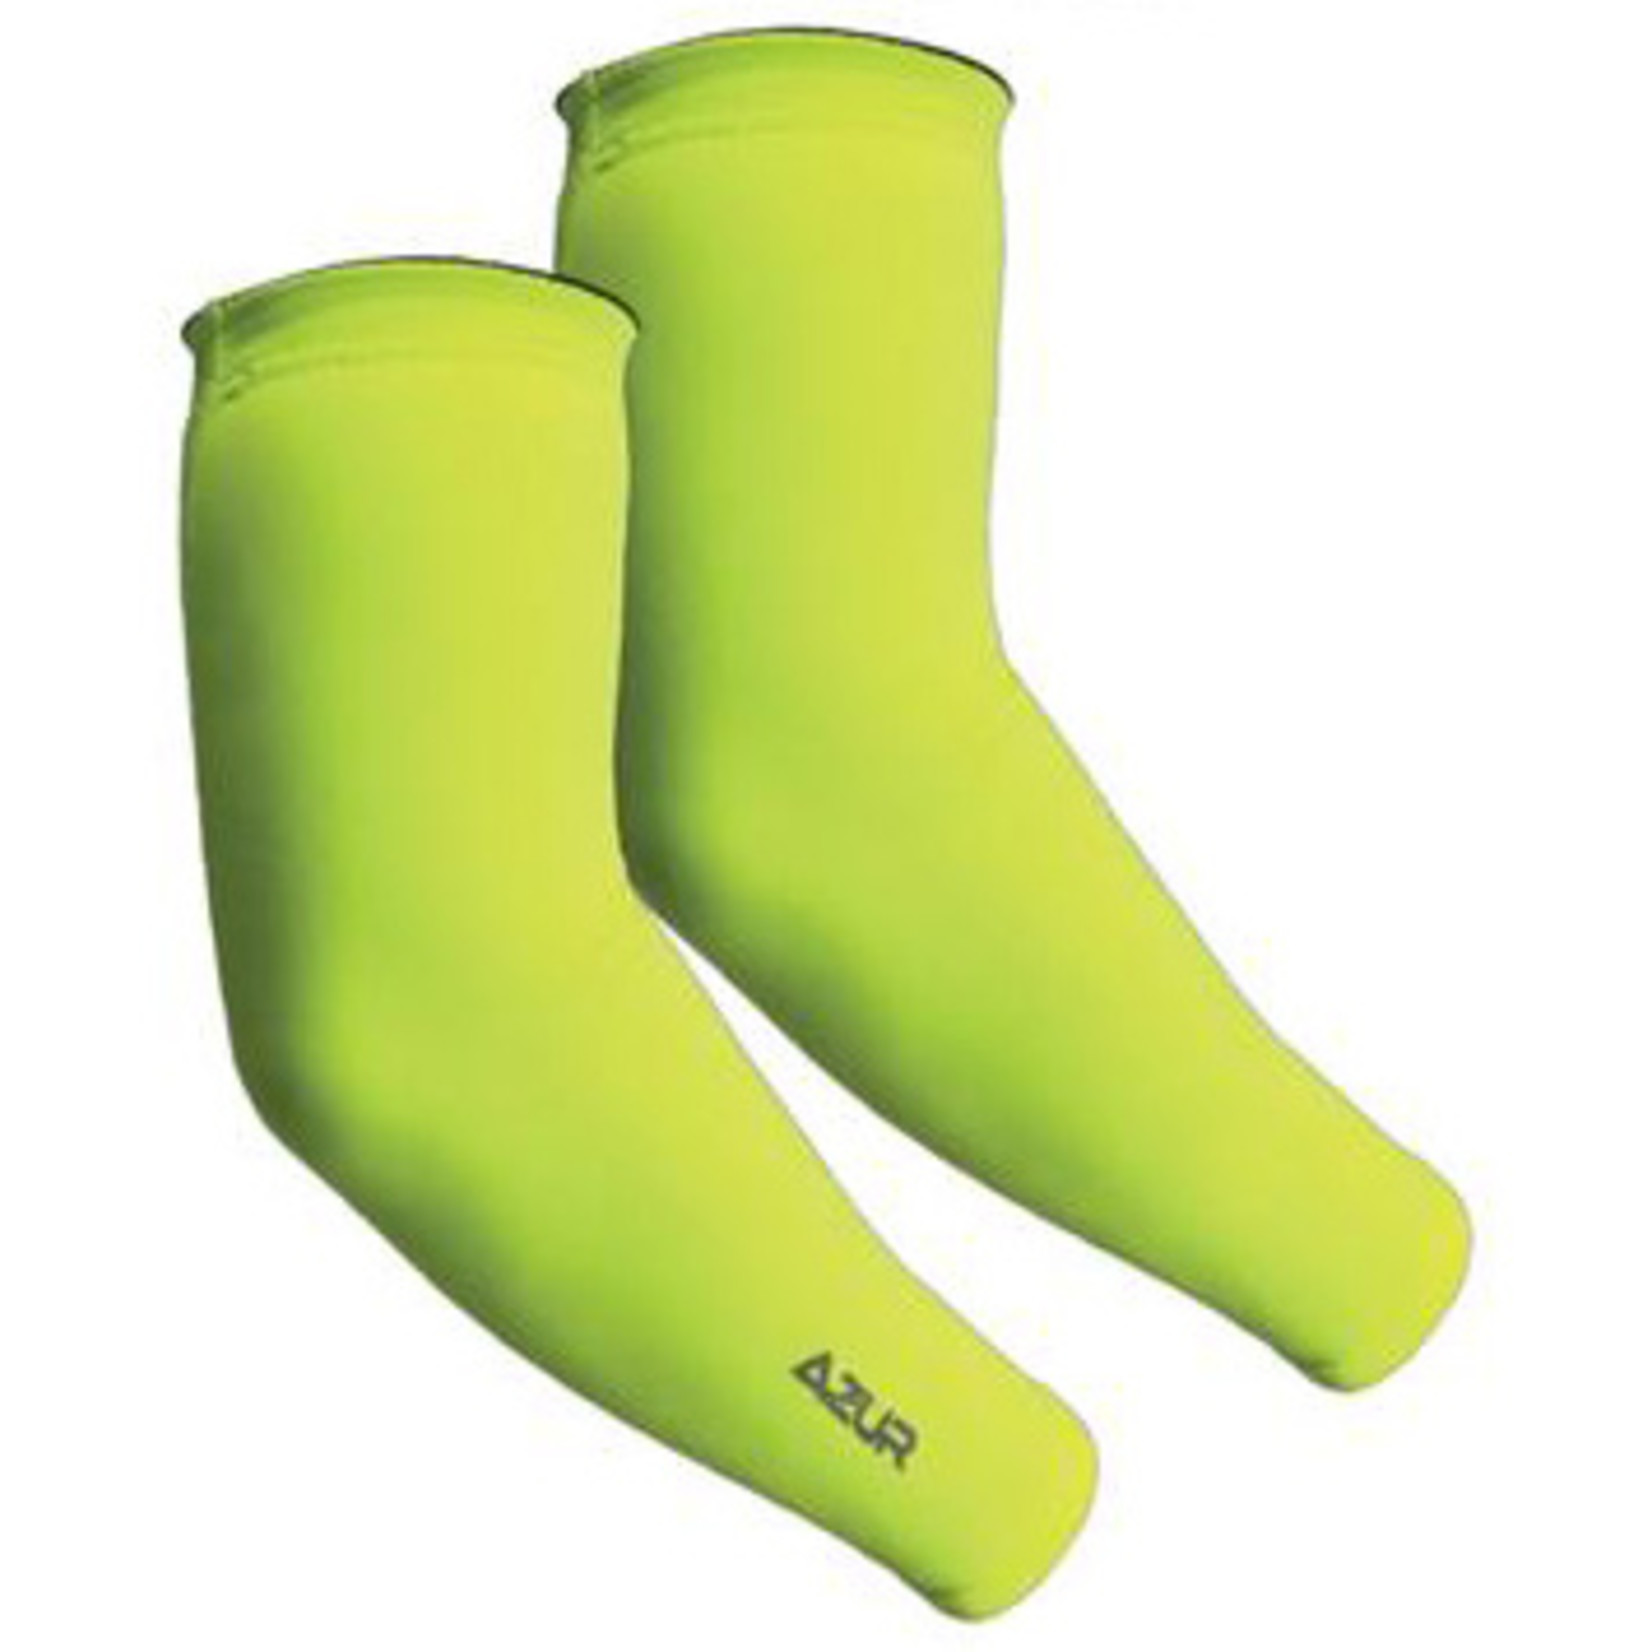 Azur Azur Bike/Cycling Arm Warmers Neon Styled To Fit Comfortably - Small - "Special"